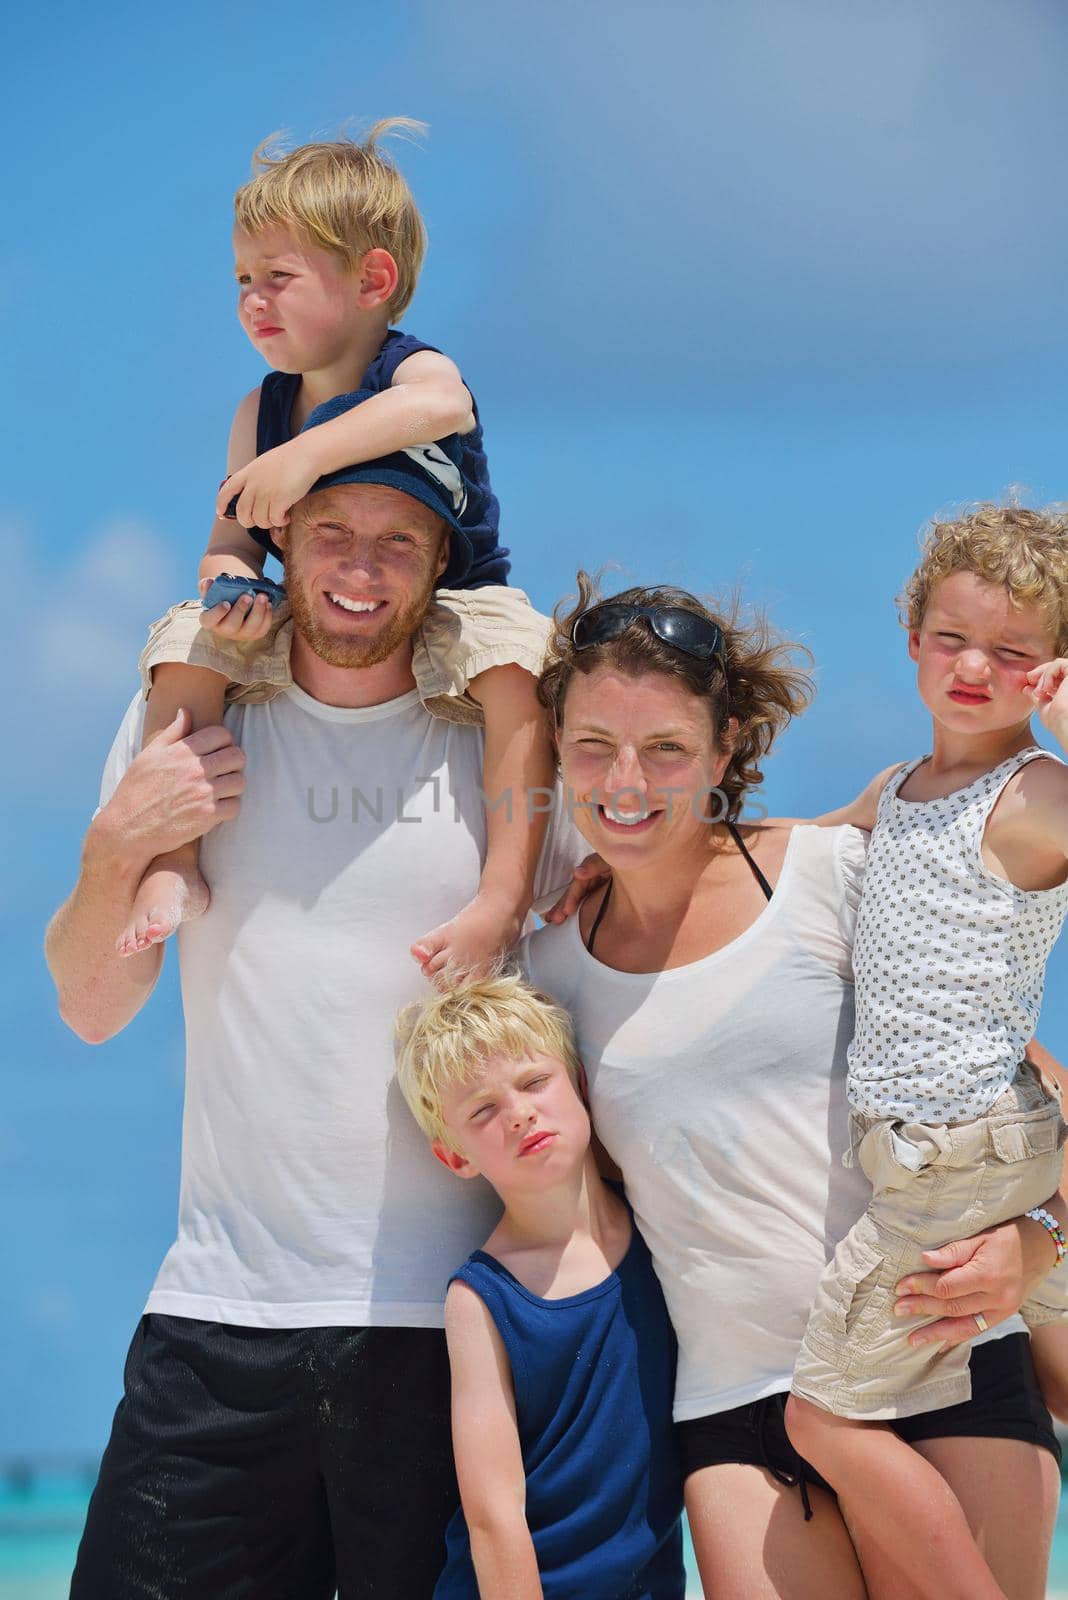 Portrait of a happy family on summer vacation  at beach